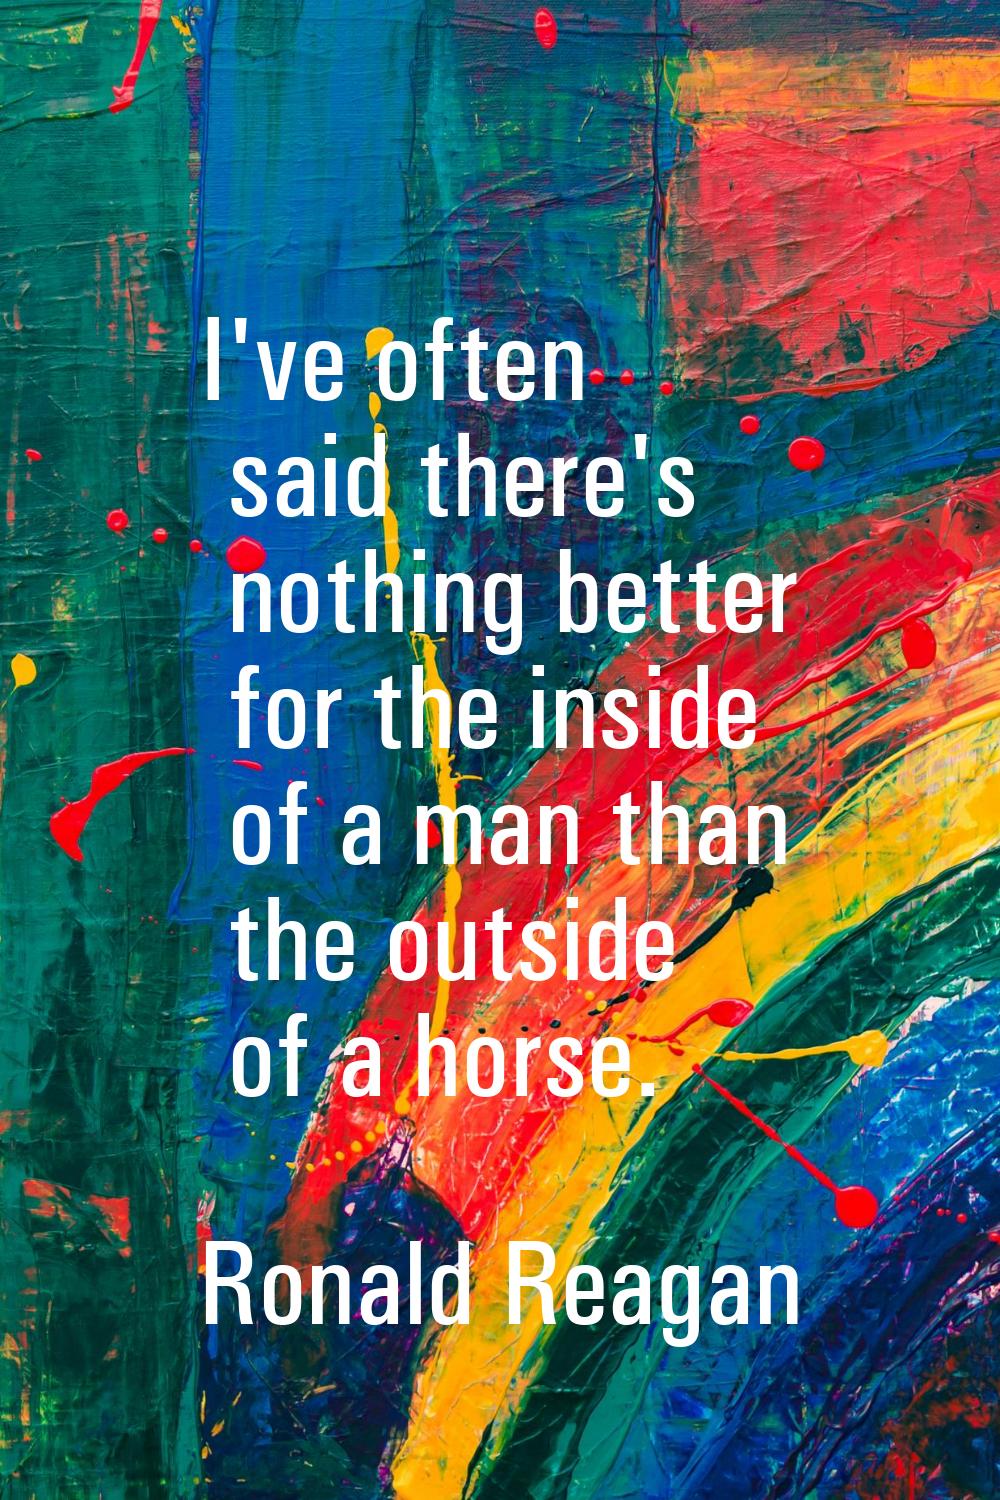 I've often said there's nothing better for the inside of a man than the outside of a horse.